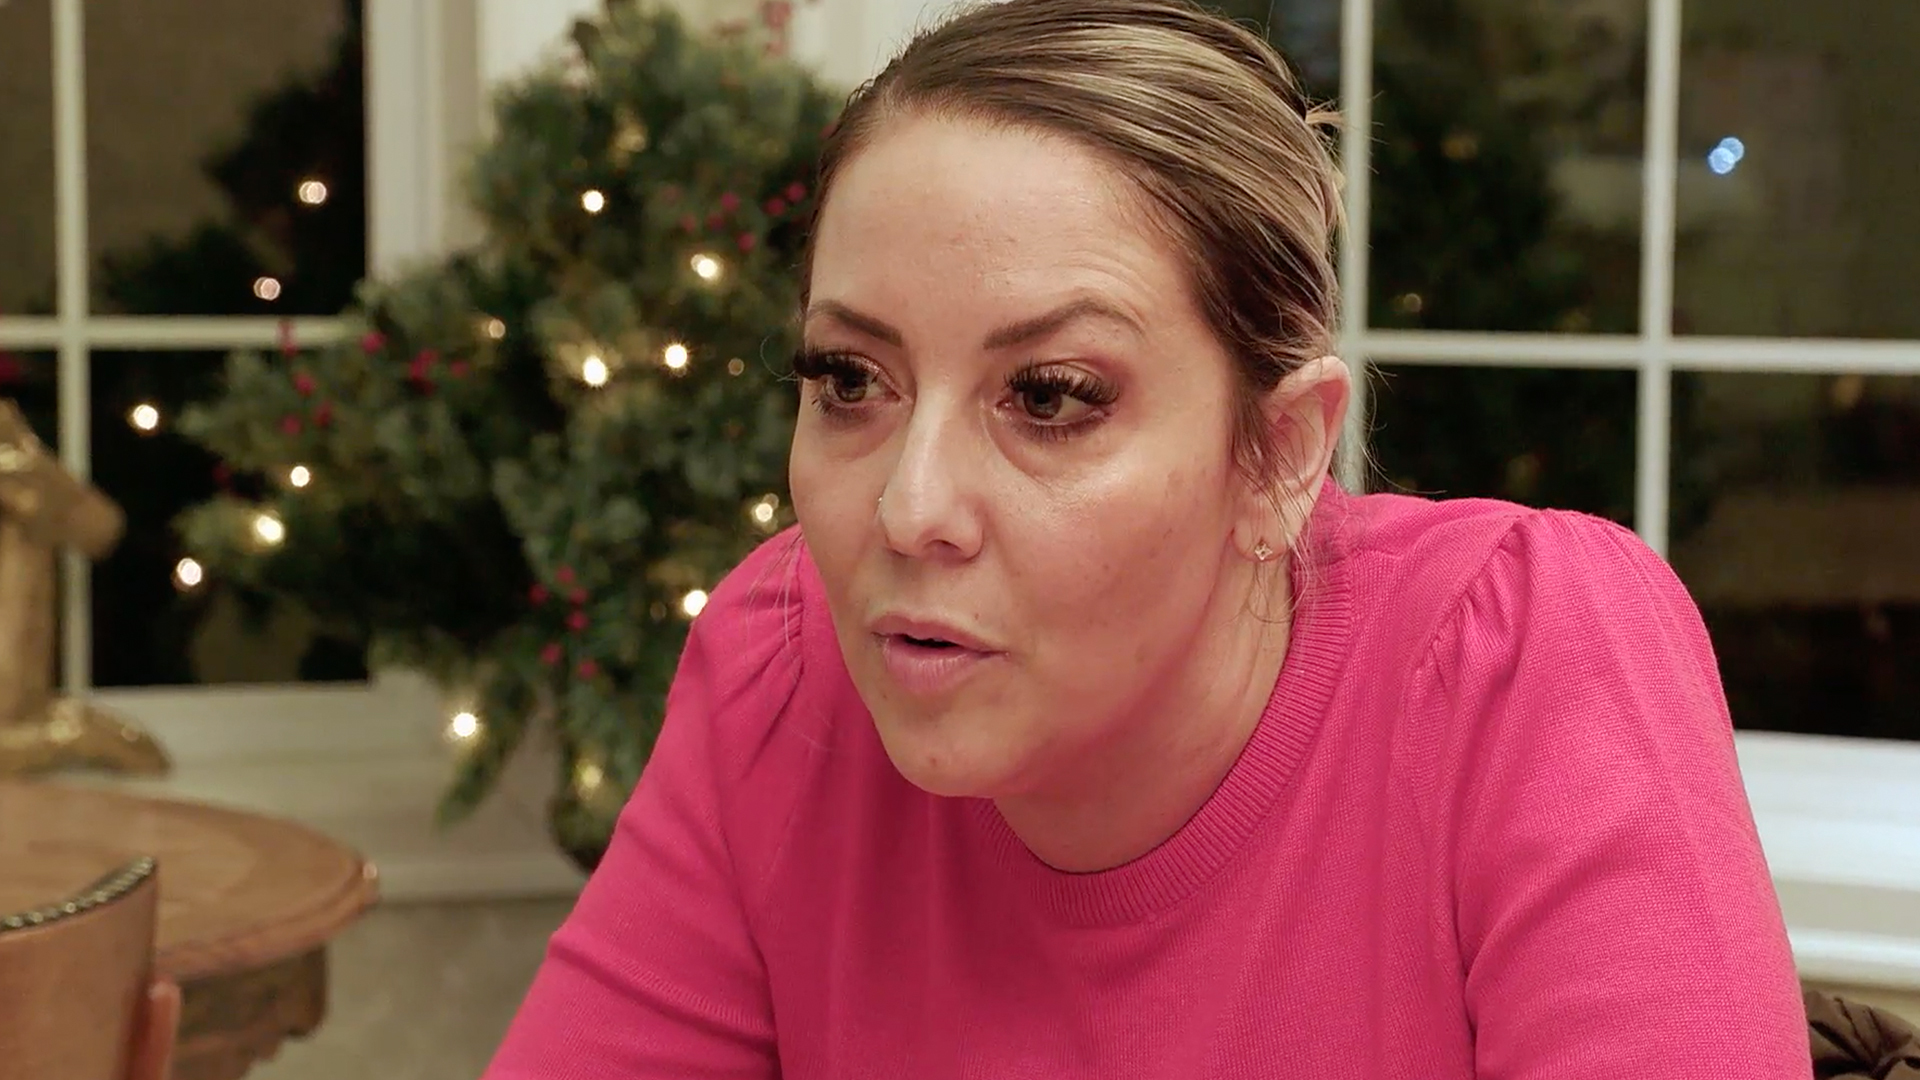 Watch Lacey & Antoine's Mom Have a Heated Sit-Down | Love After Lockup Video Extras